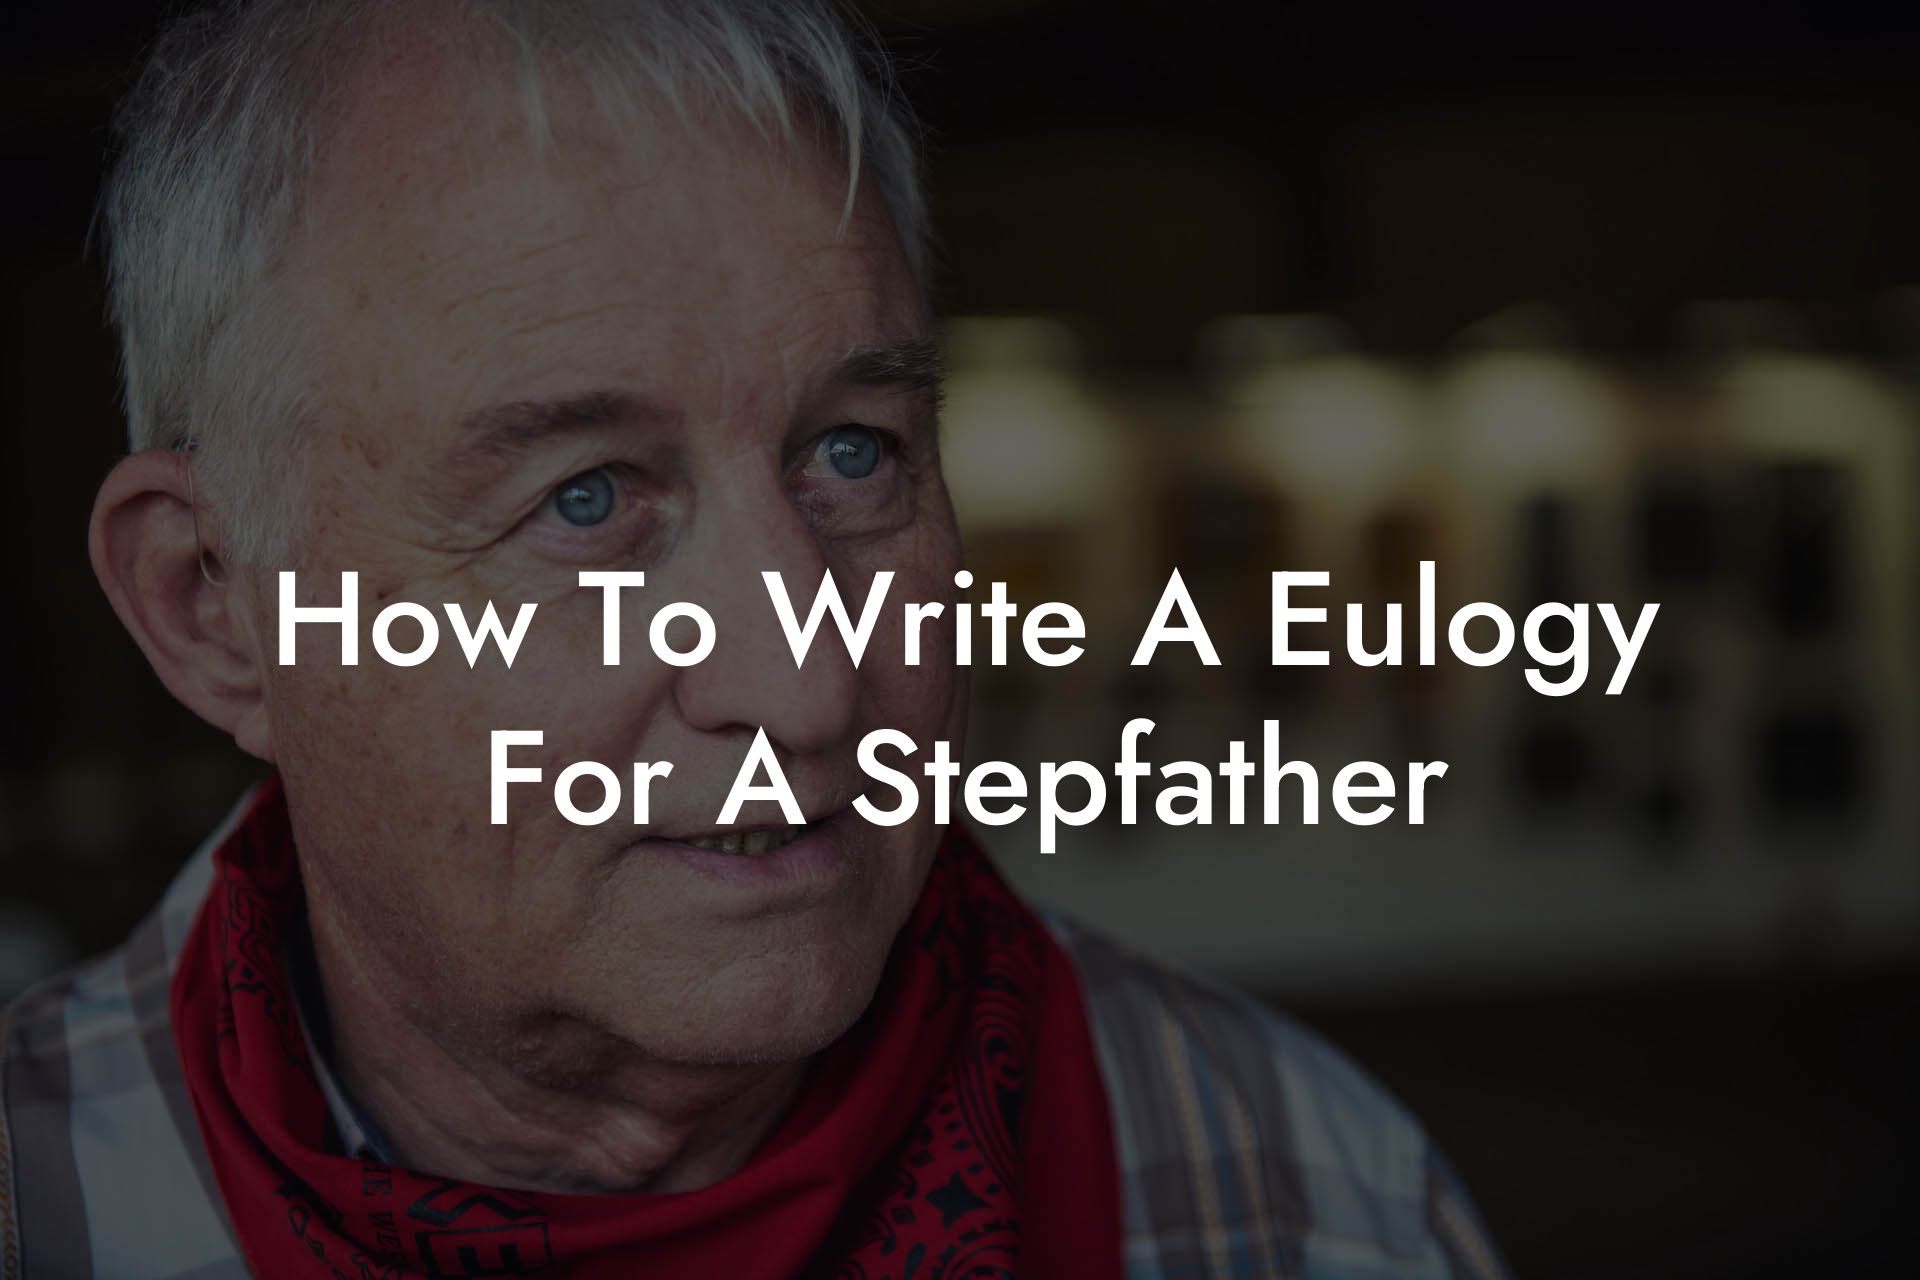 How To Write A Eulogy For A Stepfather